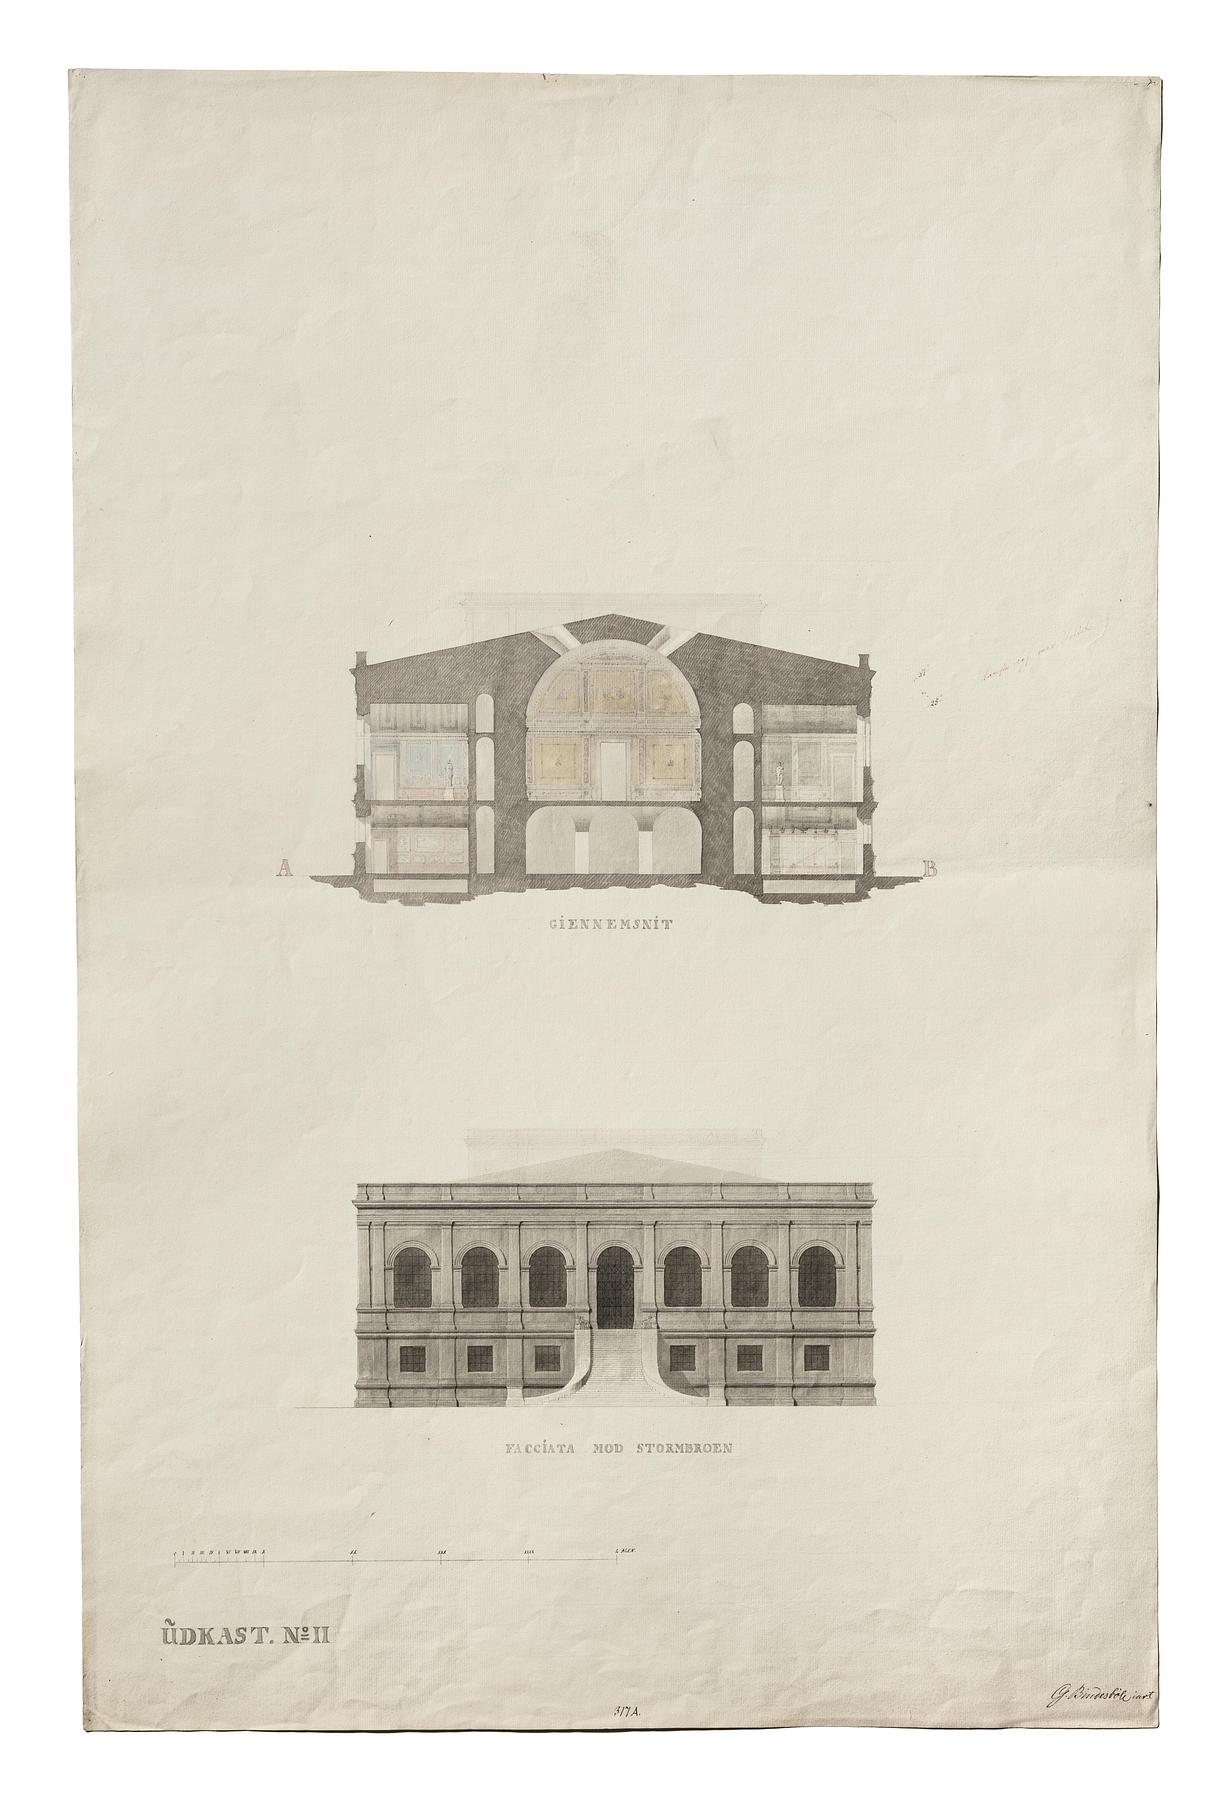 Thorvaldsens Museum, Sketch No. 2 for Cross Section and Elevation of the Facade towards Stormbroen, D1610